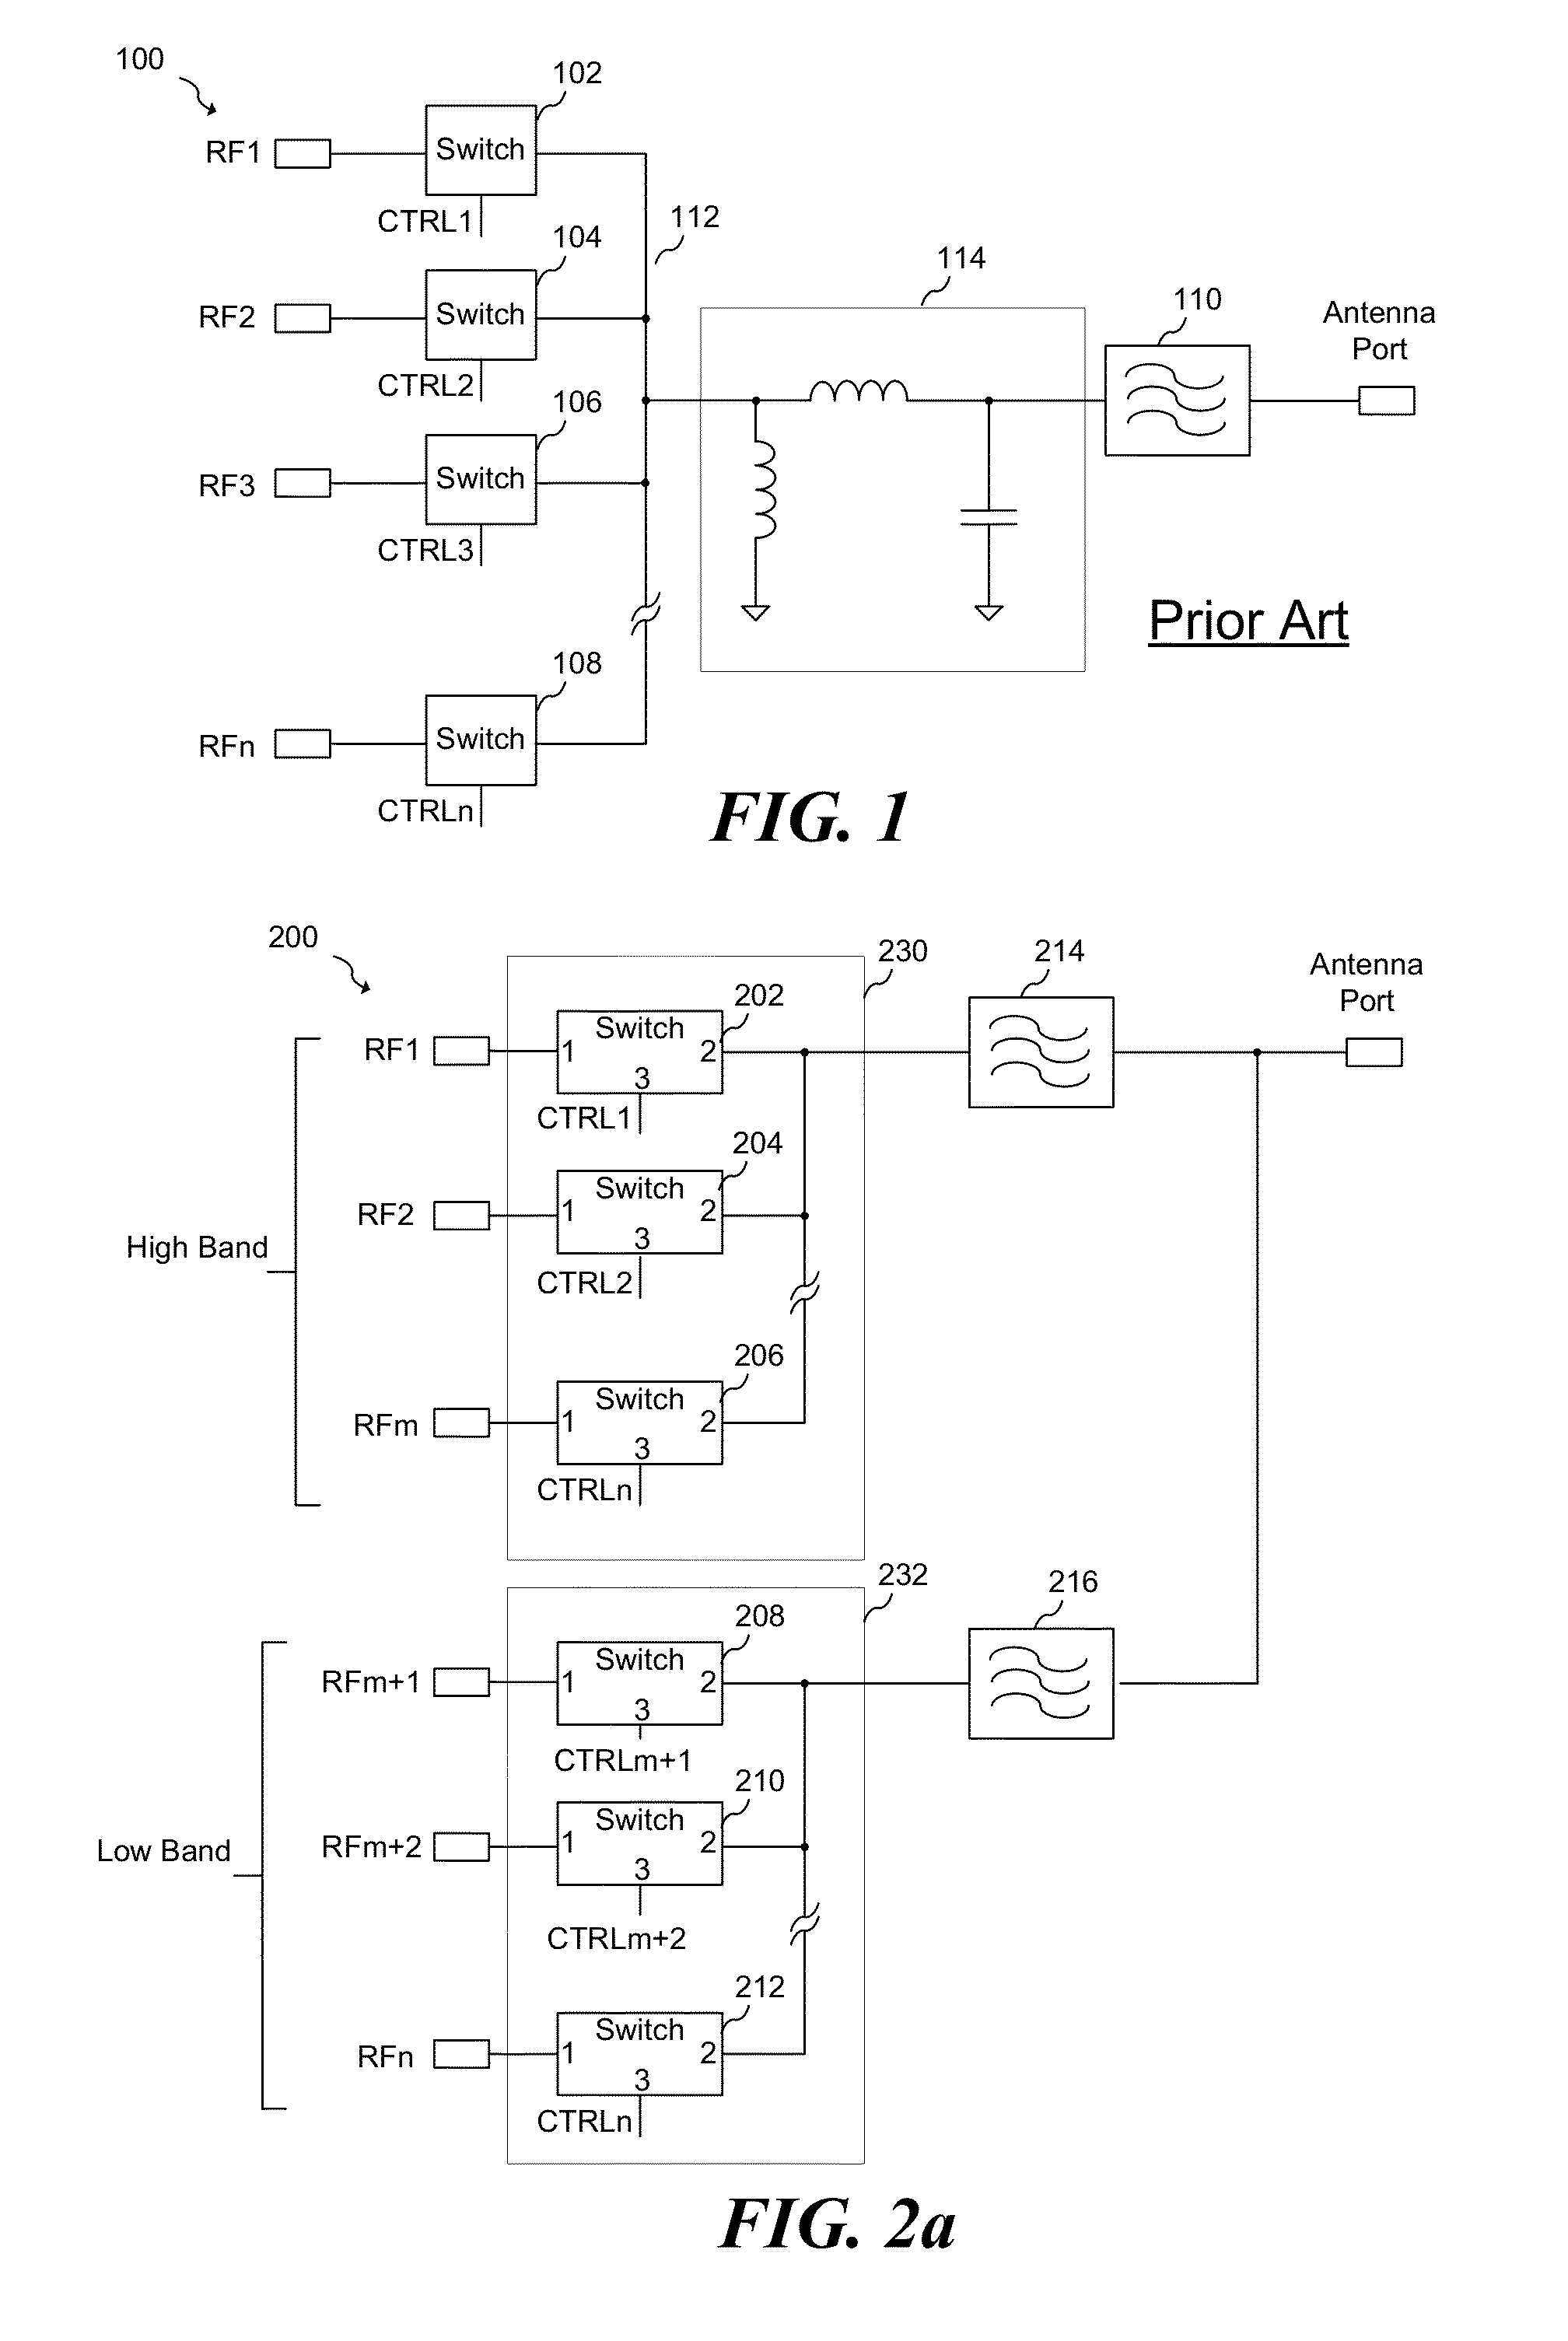 System and Method for a Radio Frequency Switch